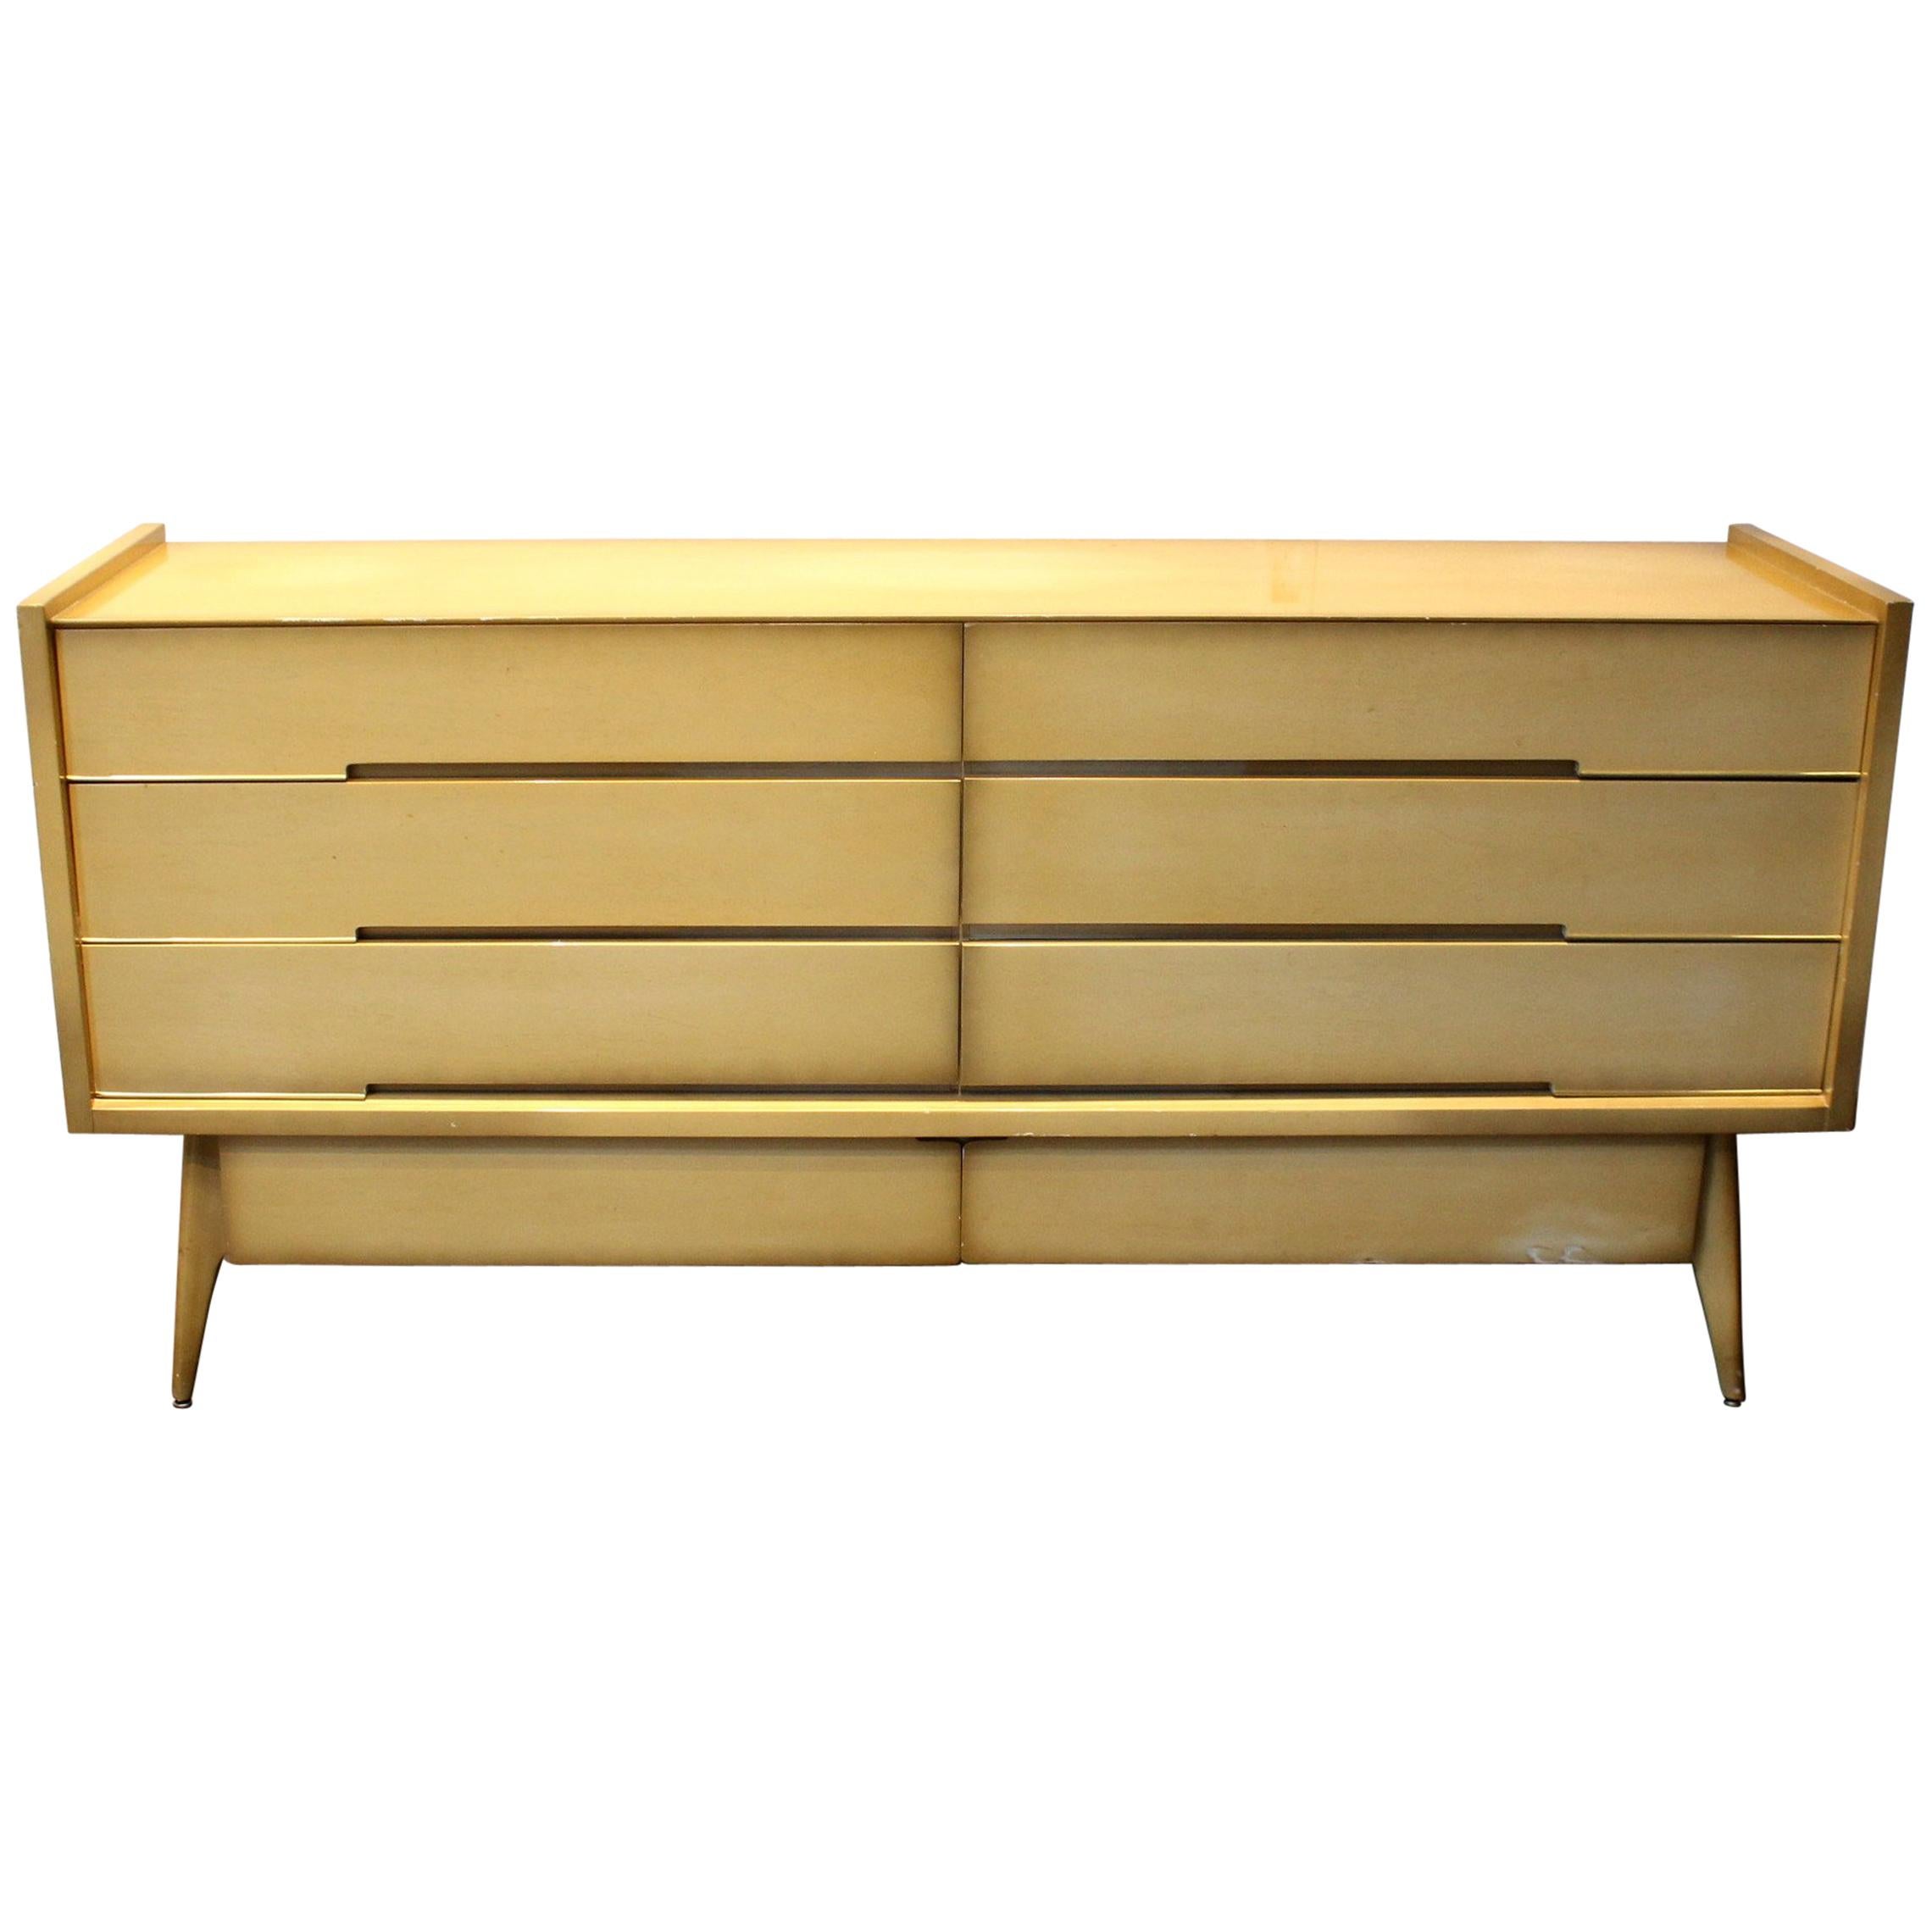 Large 1960s Sculptural Dresser, Maple with Brass Pulls For Sale